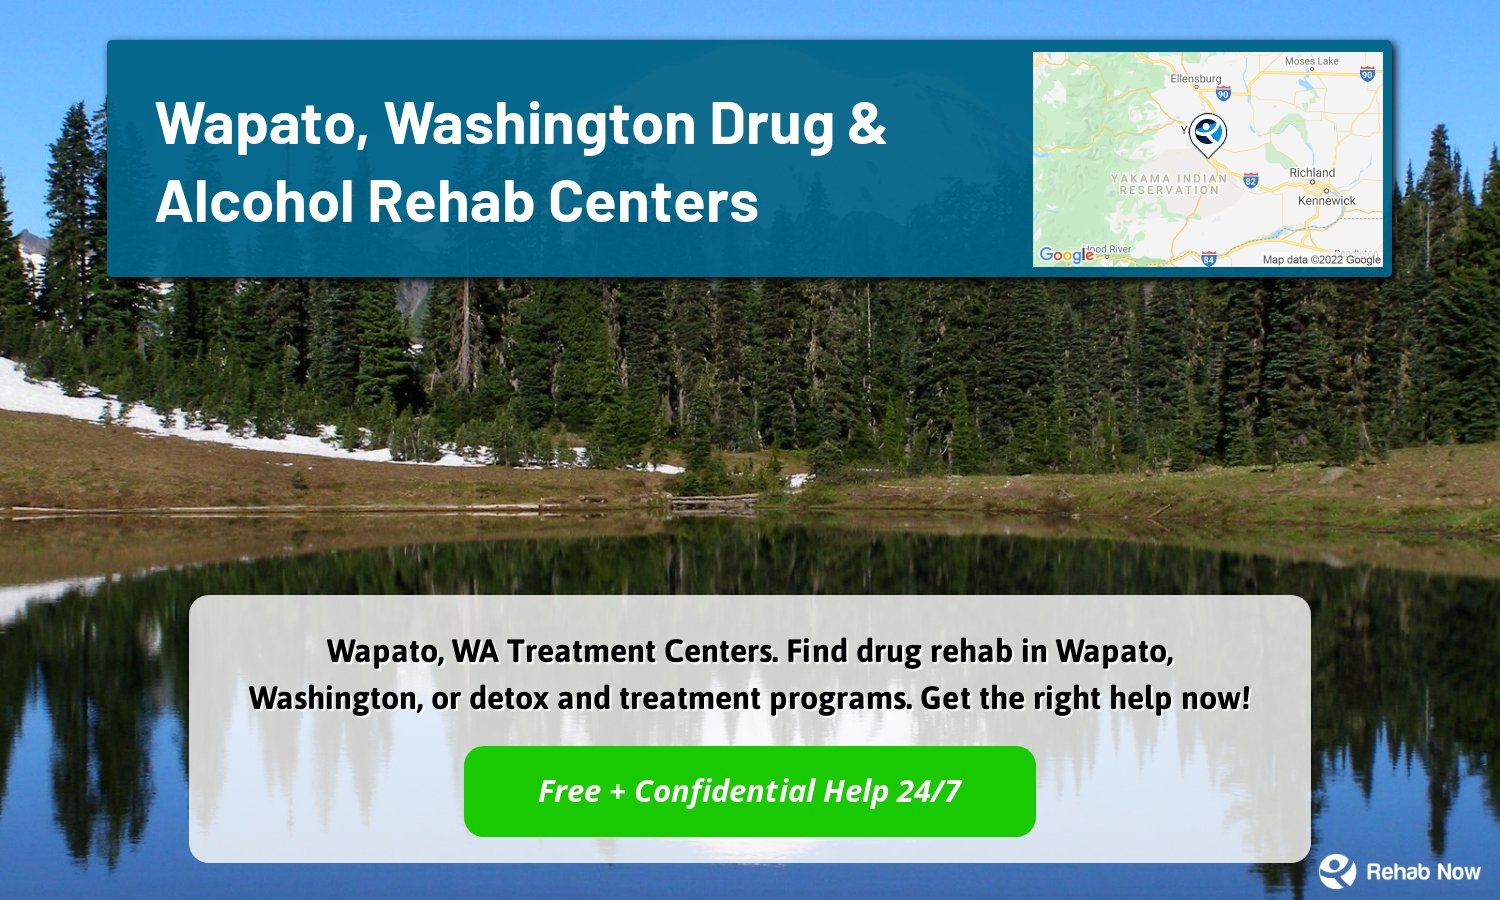 Wapato, WA Treatment Centers. Find drug rehab in Wapato, Washington, or detox and treatment programs. Get the right help now!